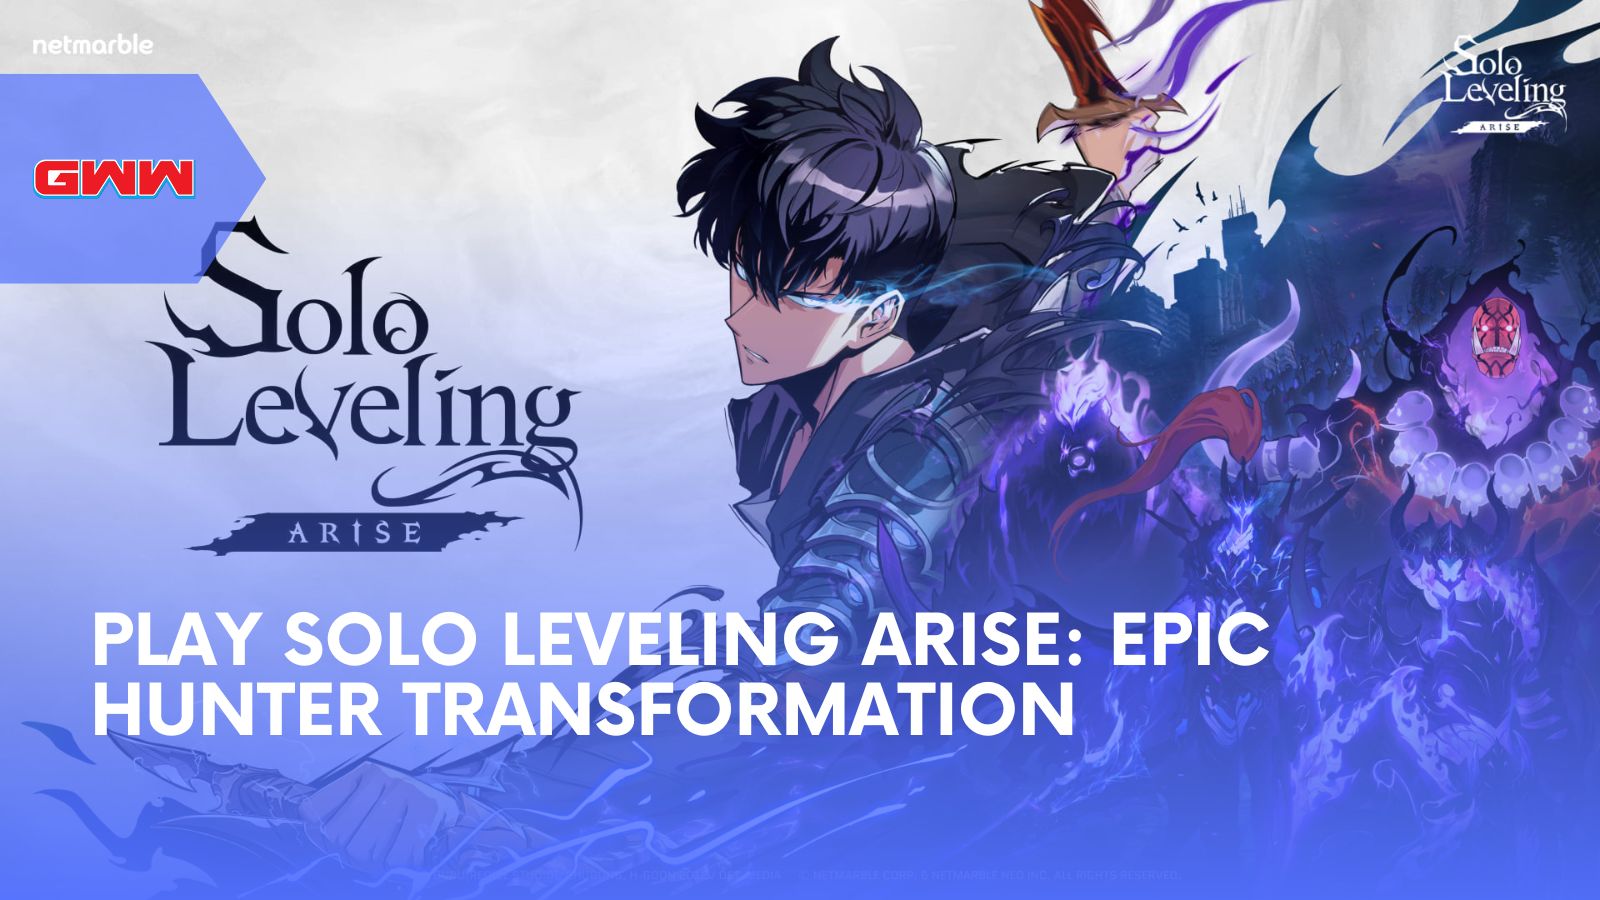 Play Solo Leveling Arise: Epic Hunter Transformation